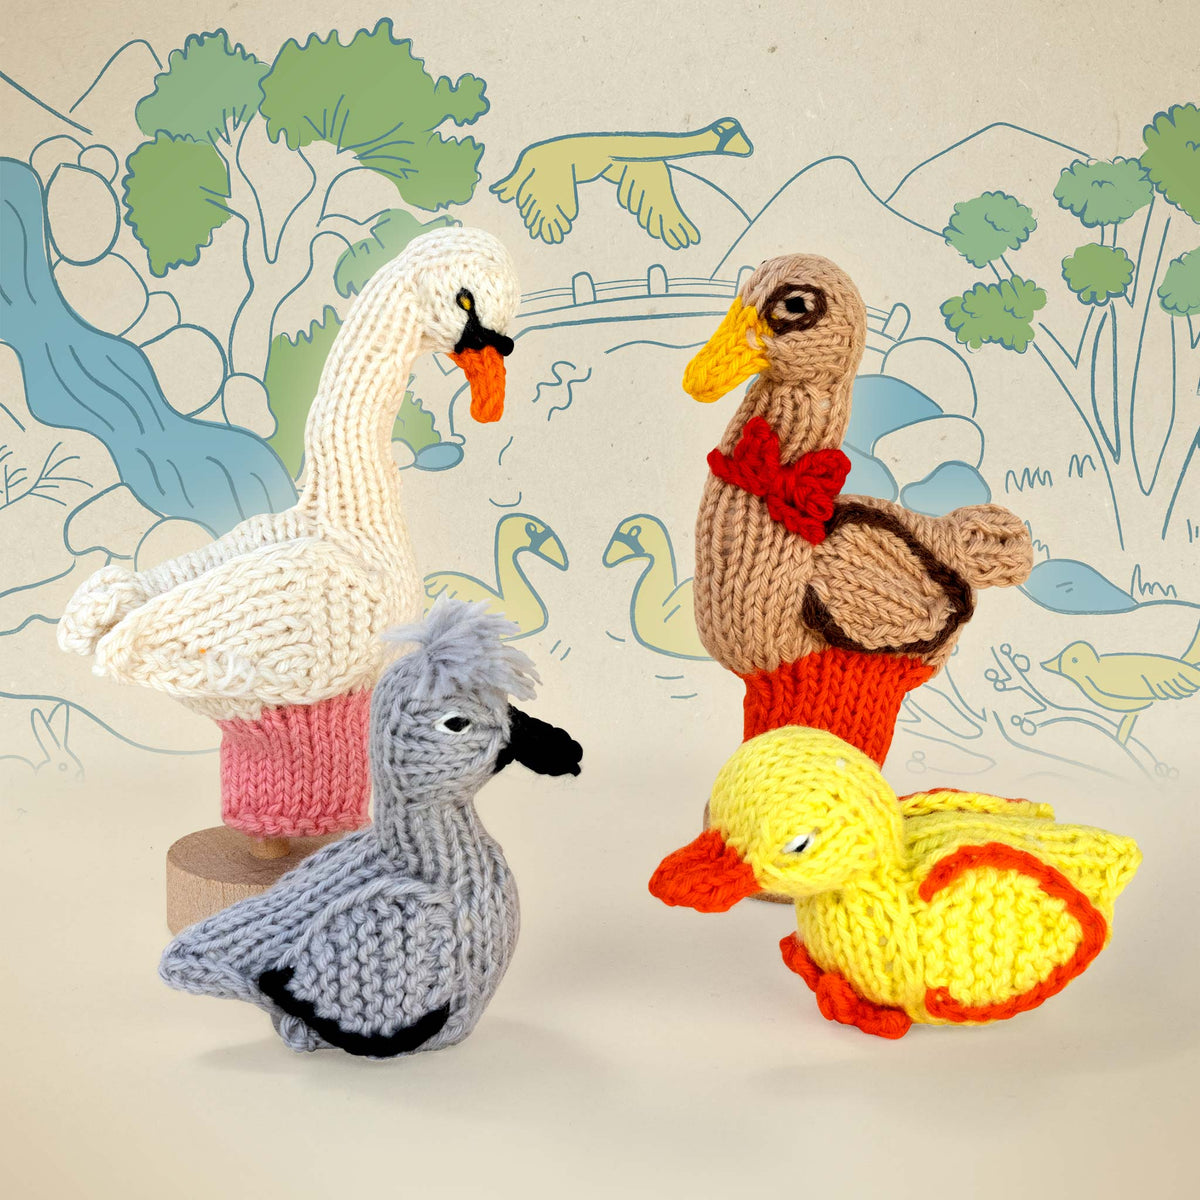 The Ugly Duckling Story Pack of 4 - Organic Cotton Finger Puppets